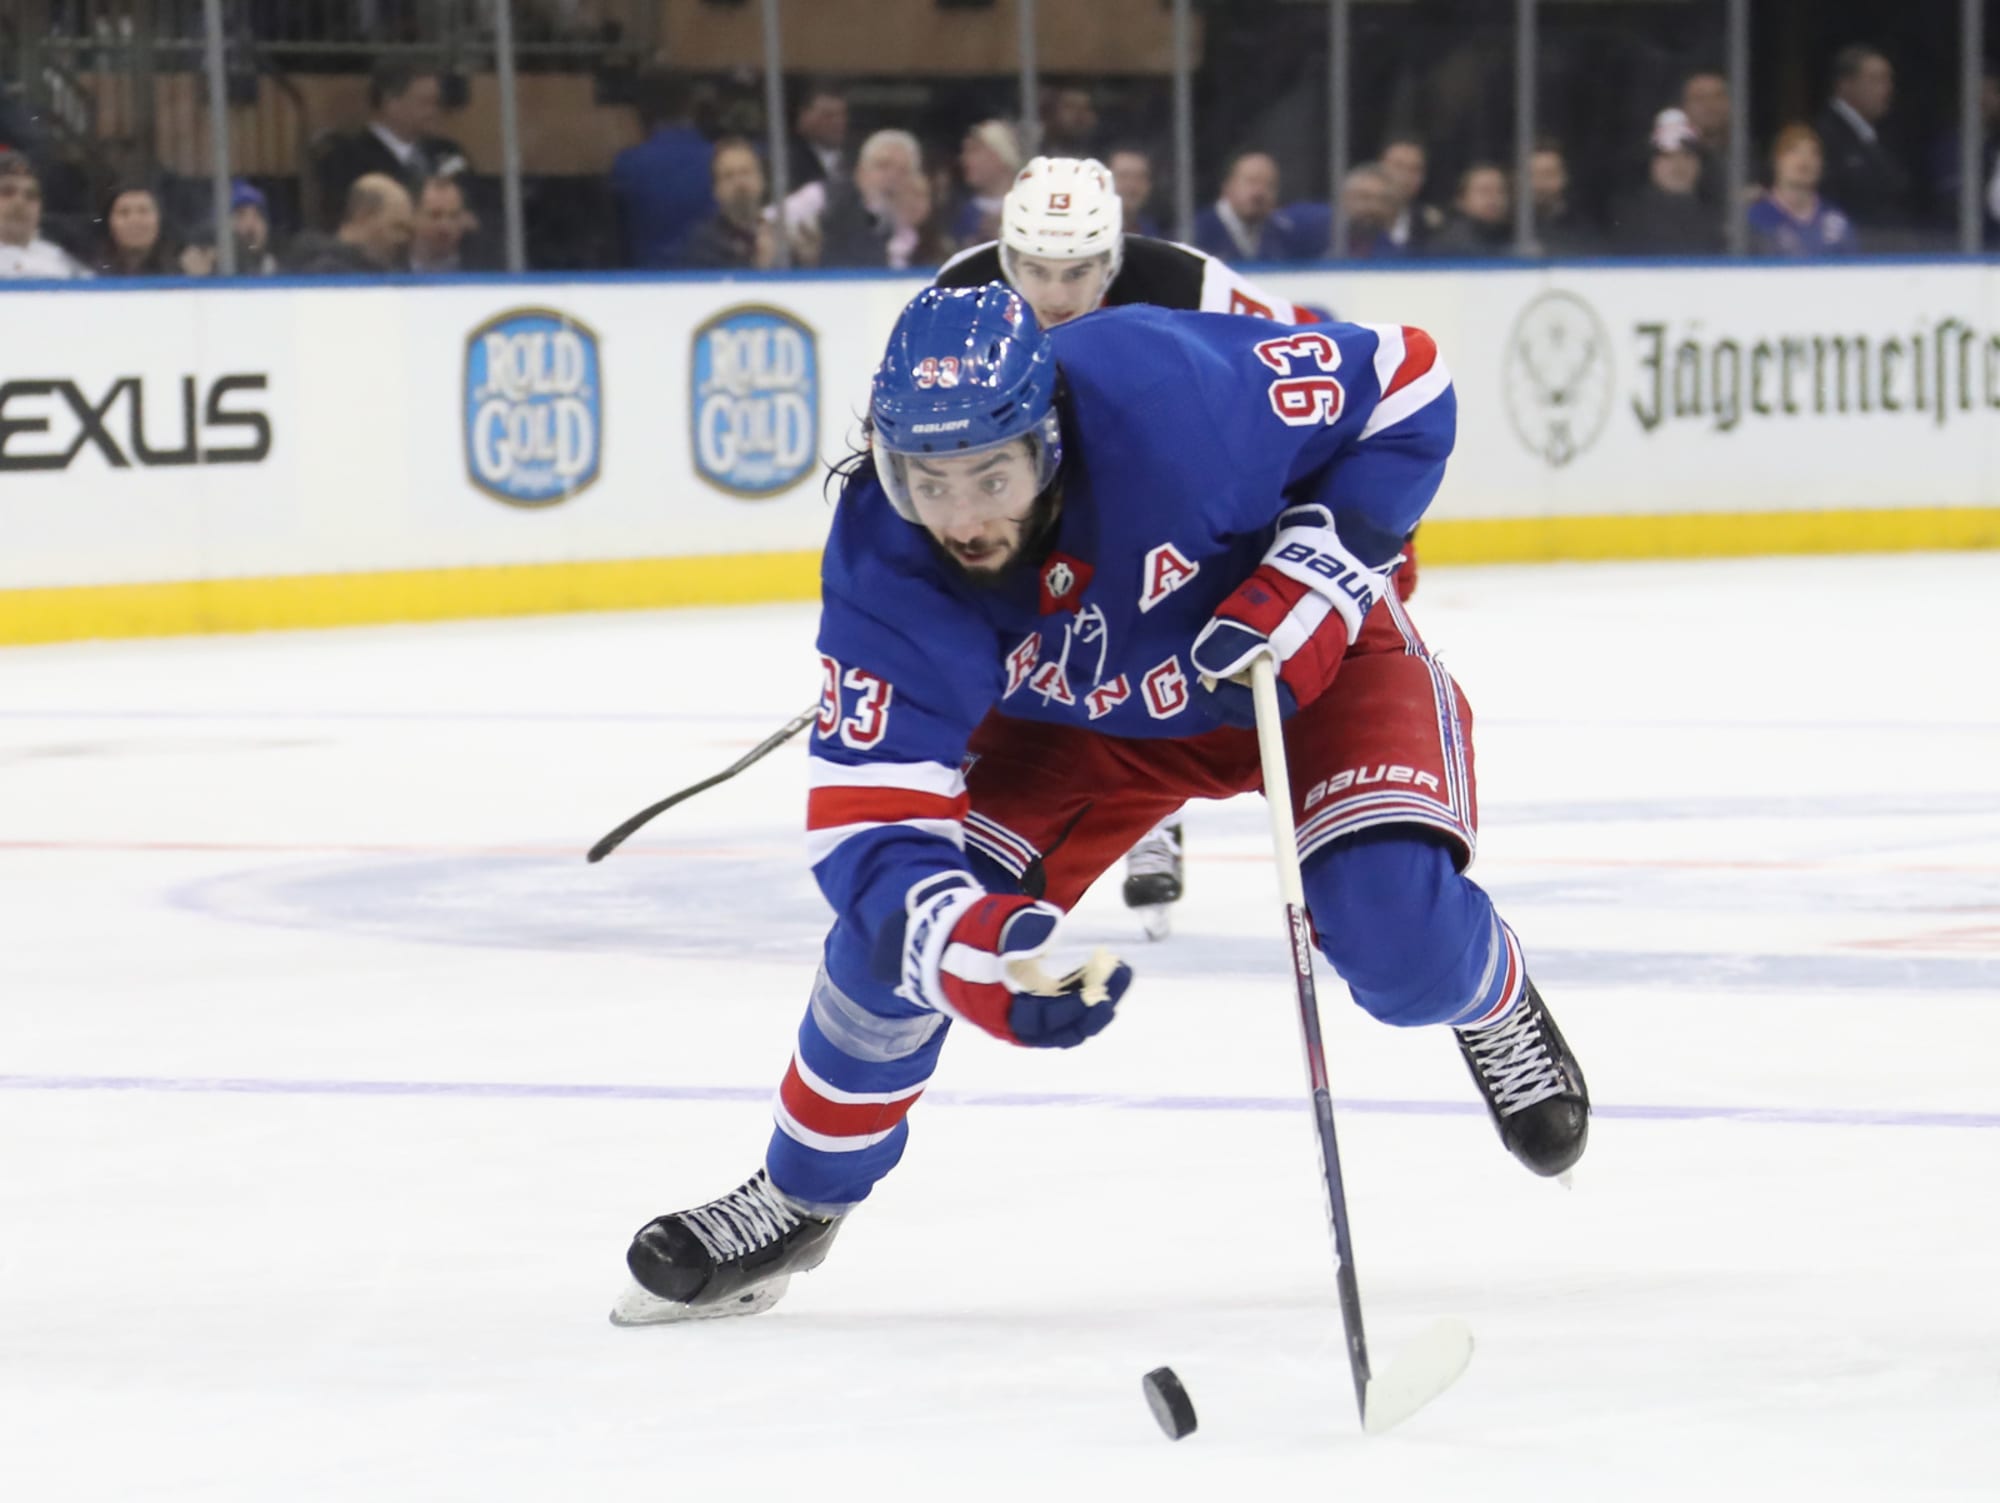 New York Rangers playoff picture for a crucial Saturday